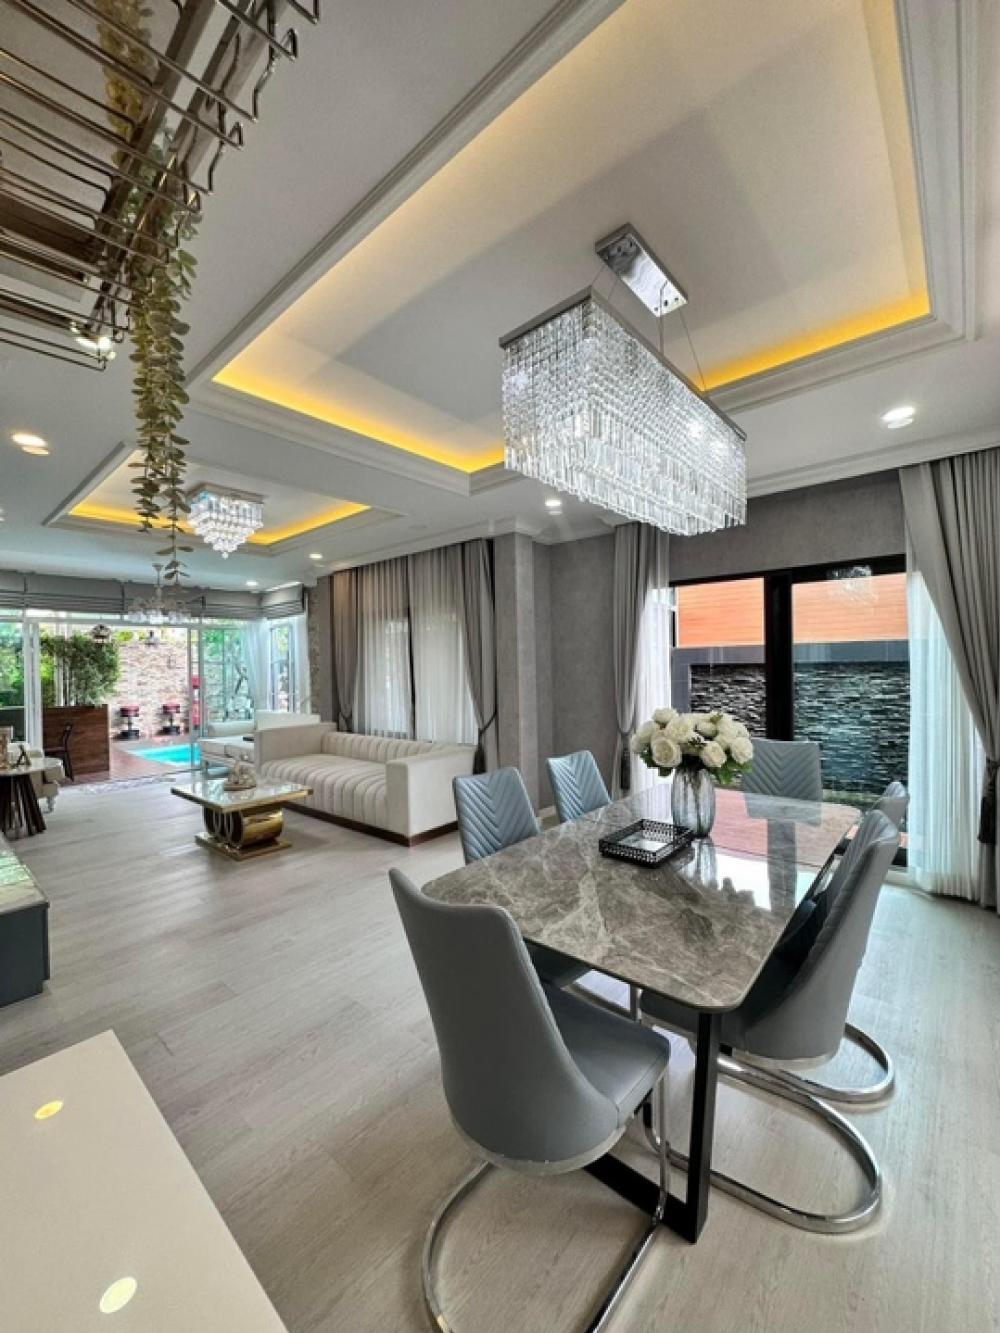 For SaleHousePinklao, Charansanitwong : Urgent sale, beautiful house, decorated as in the picture Got everything as in the picture, ready to move in 😍